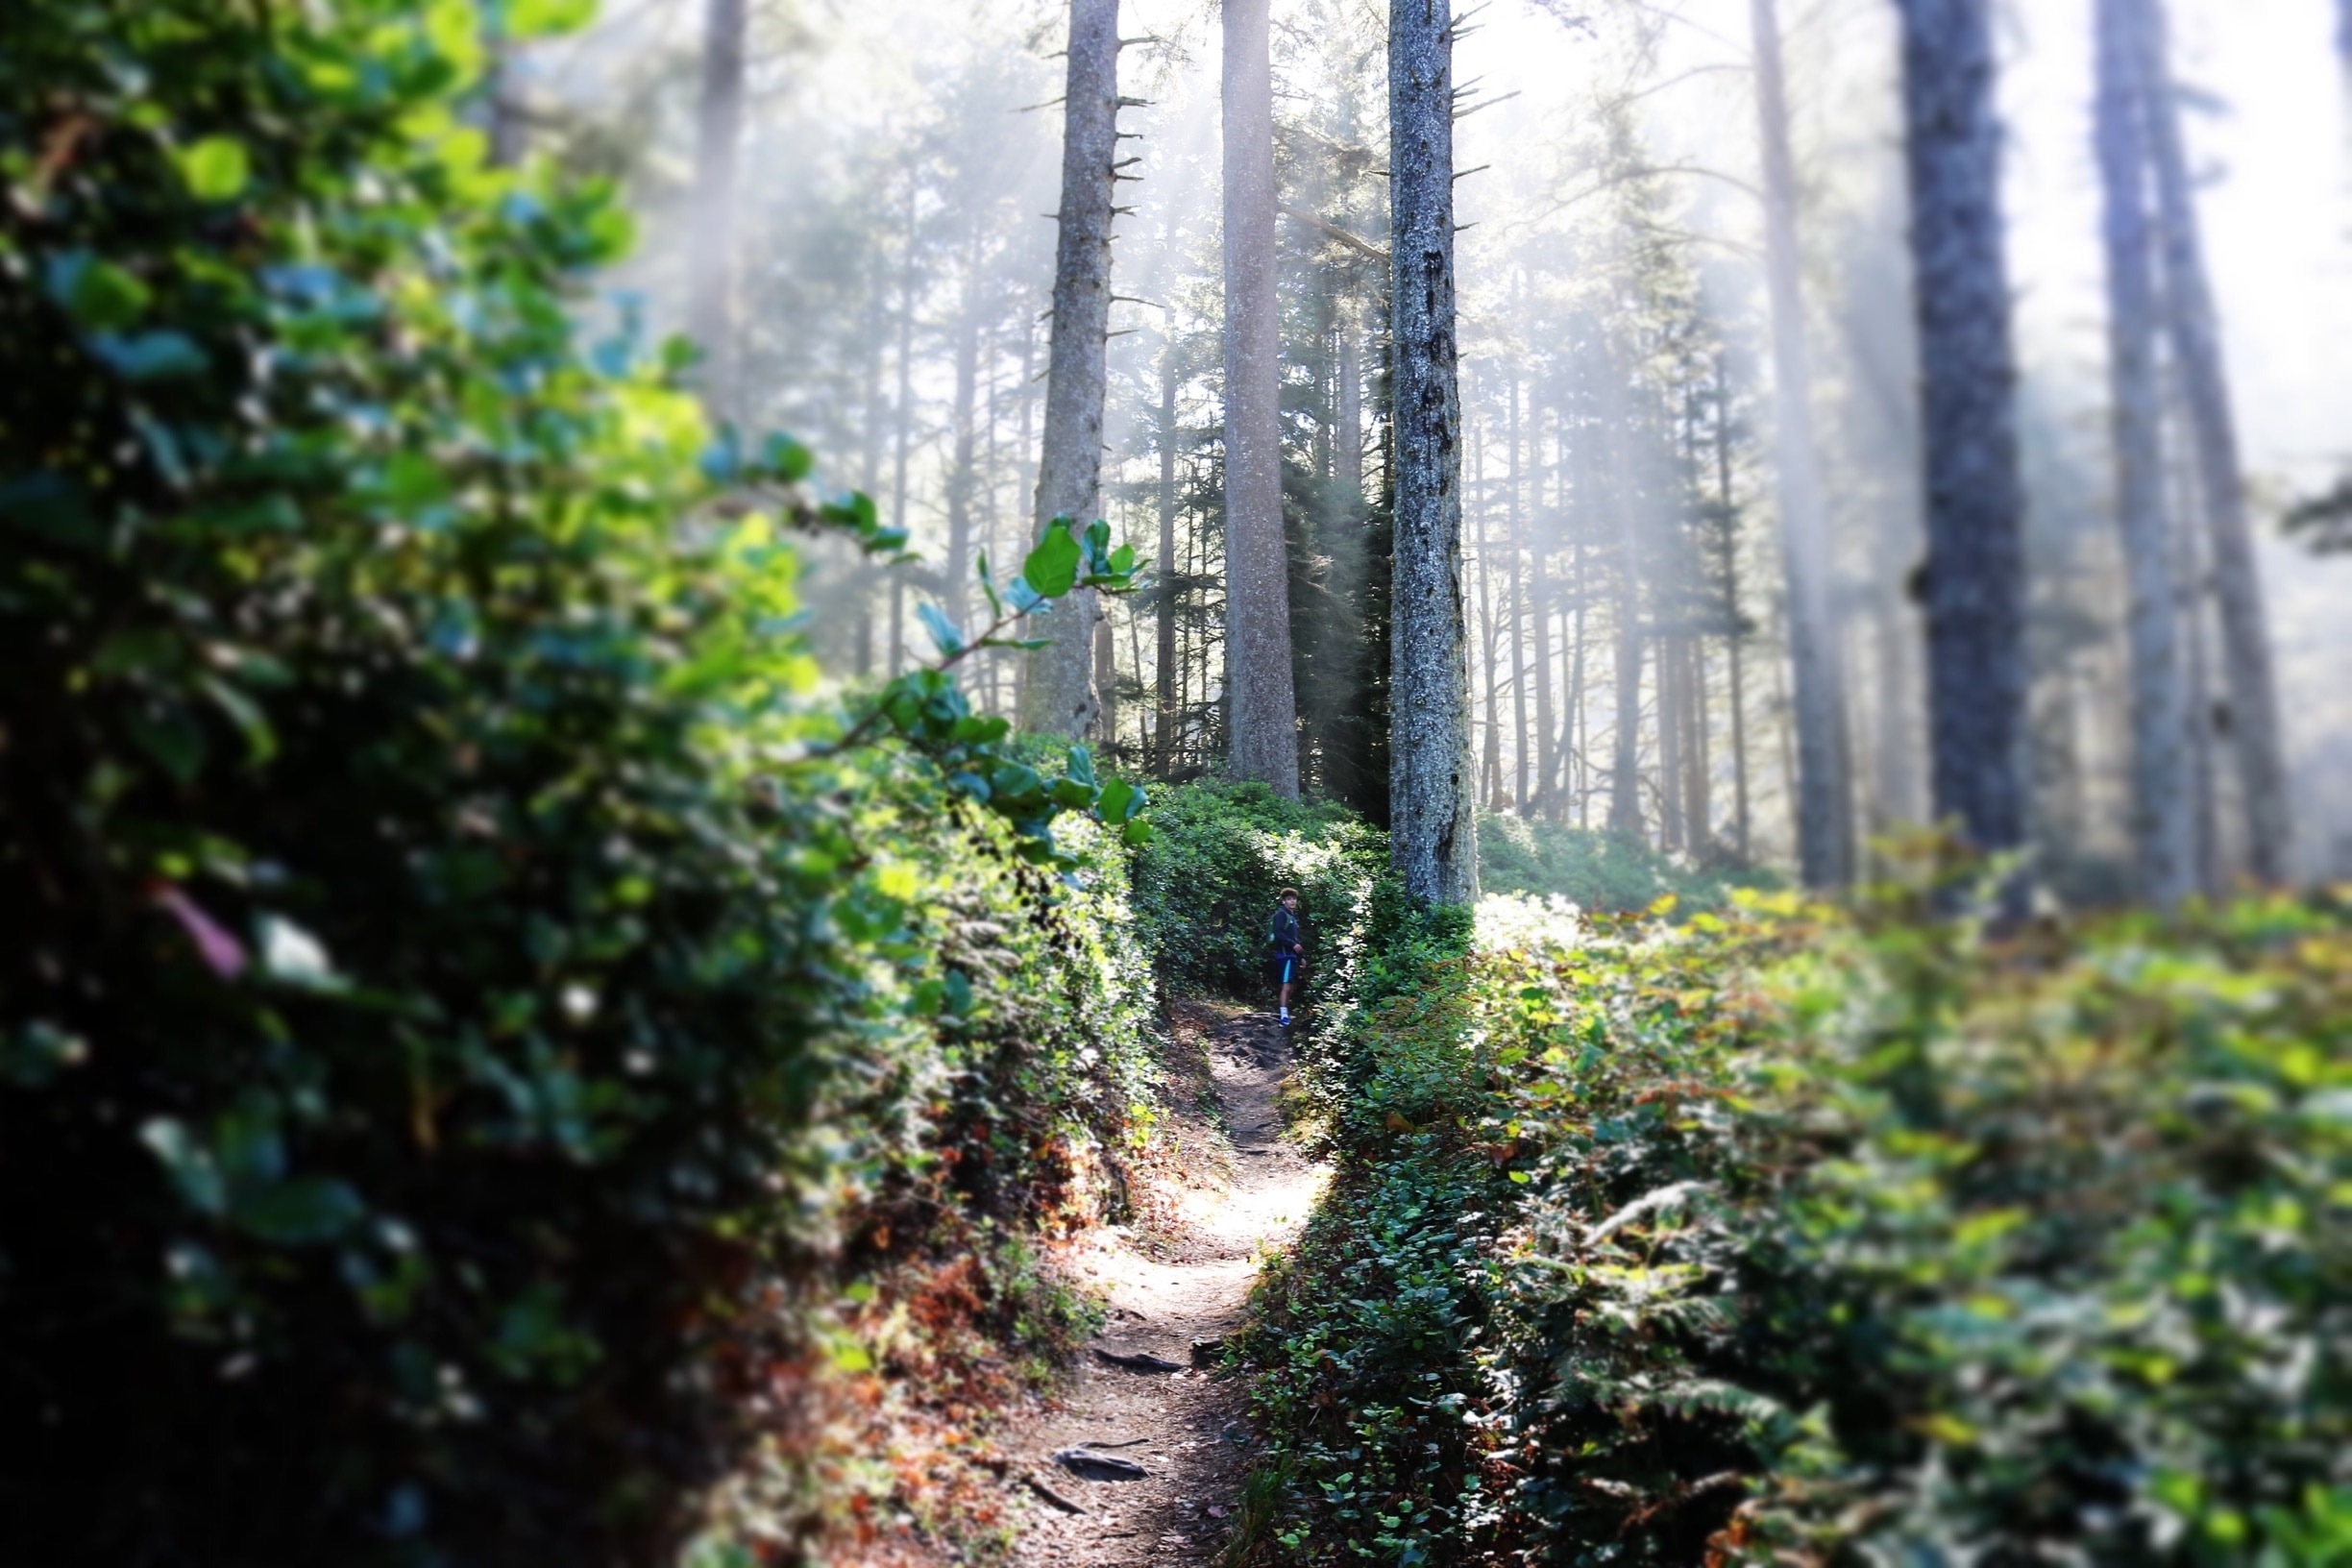 Magical hiking trails that lead to the ocean or Heceta head lighthouse.